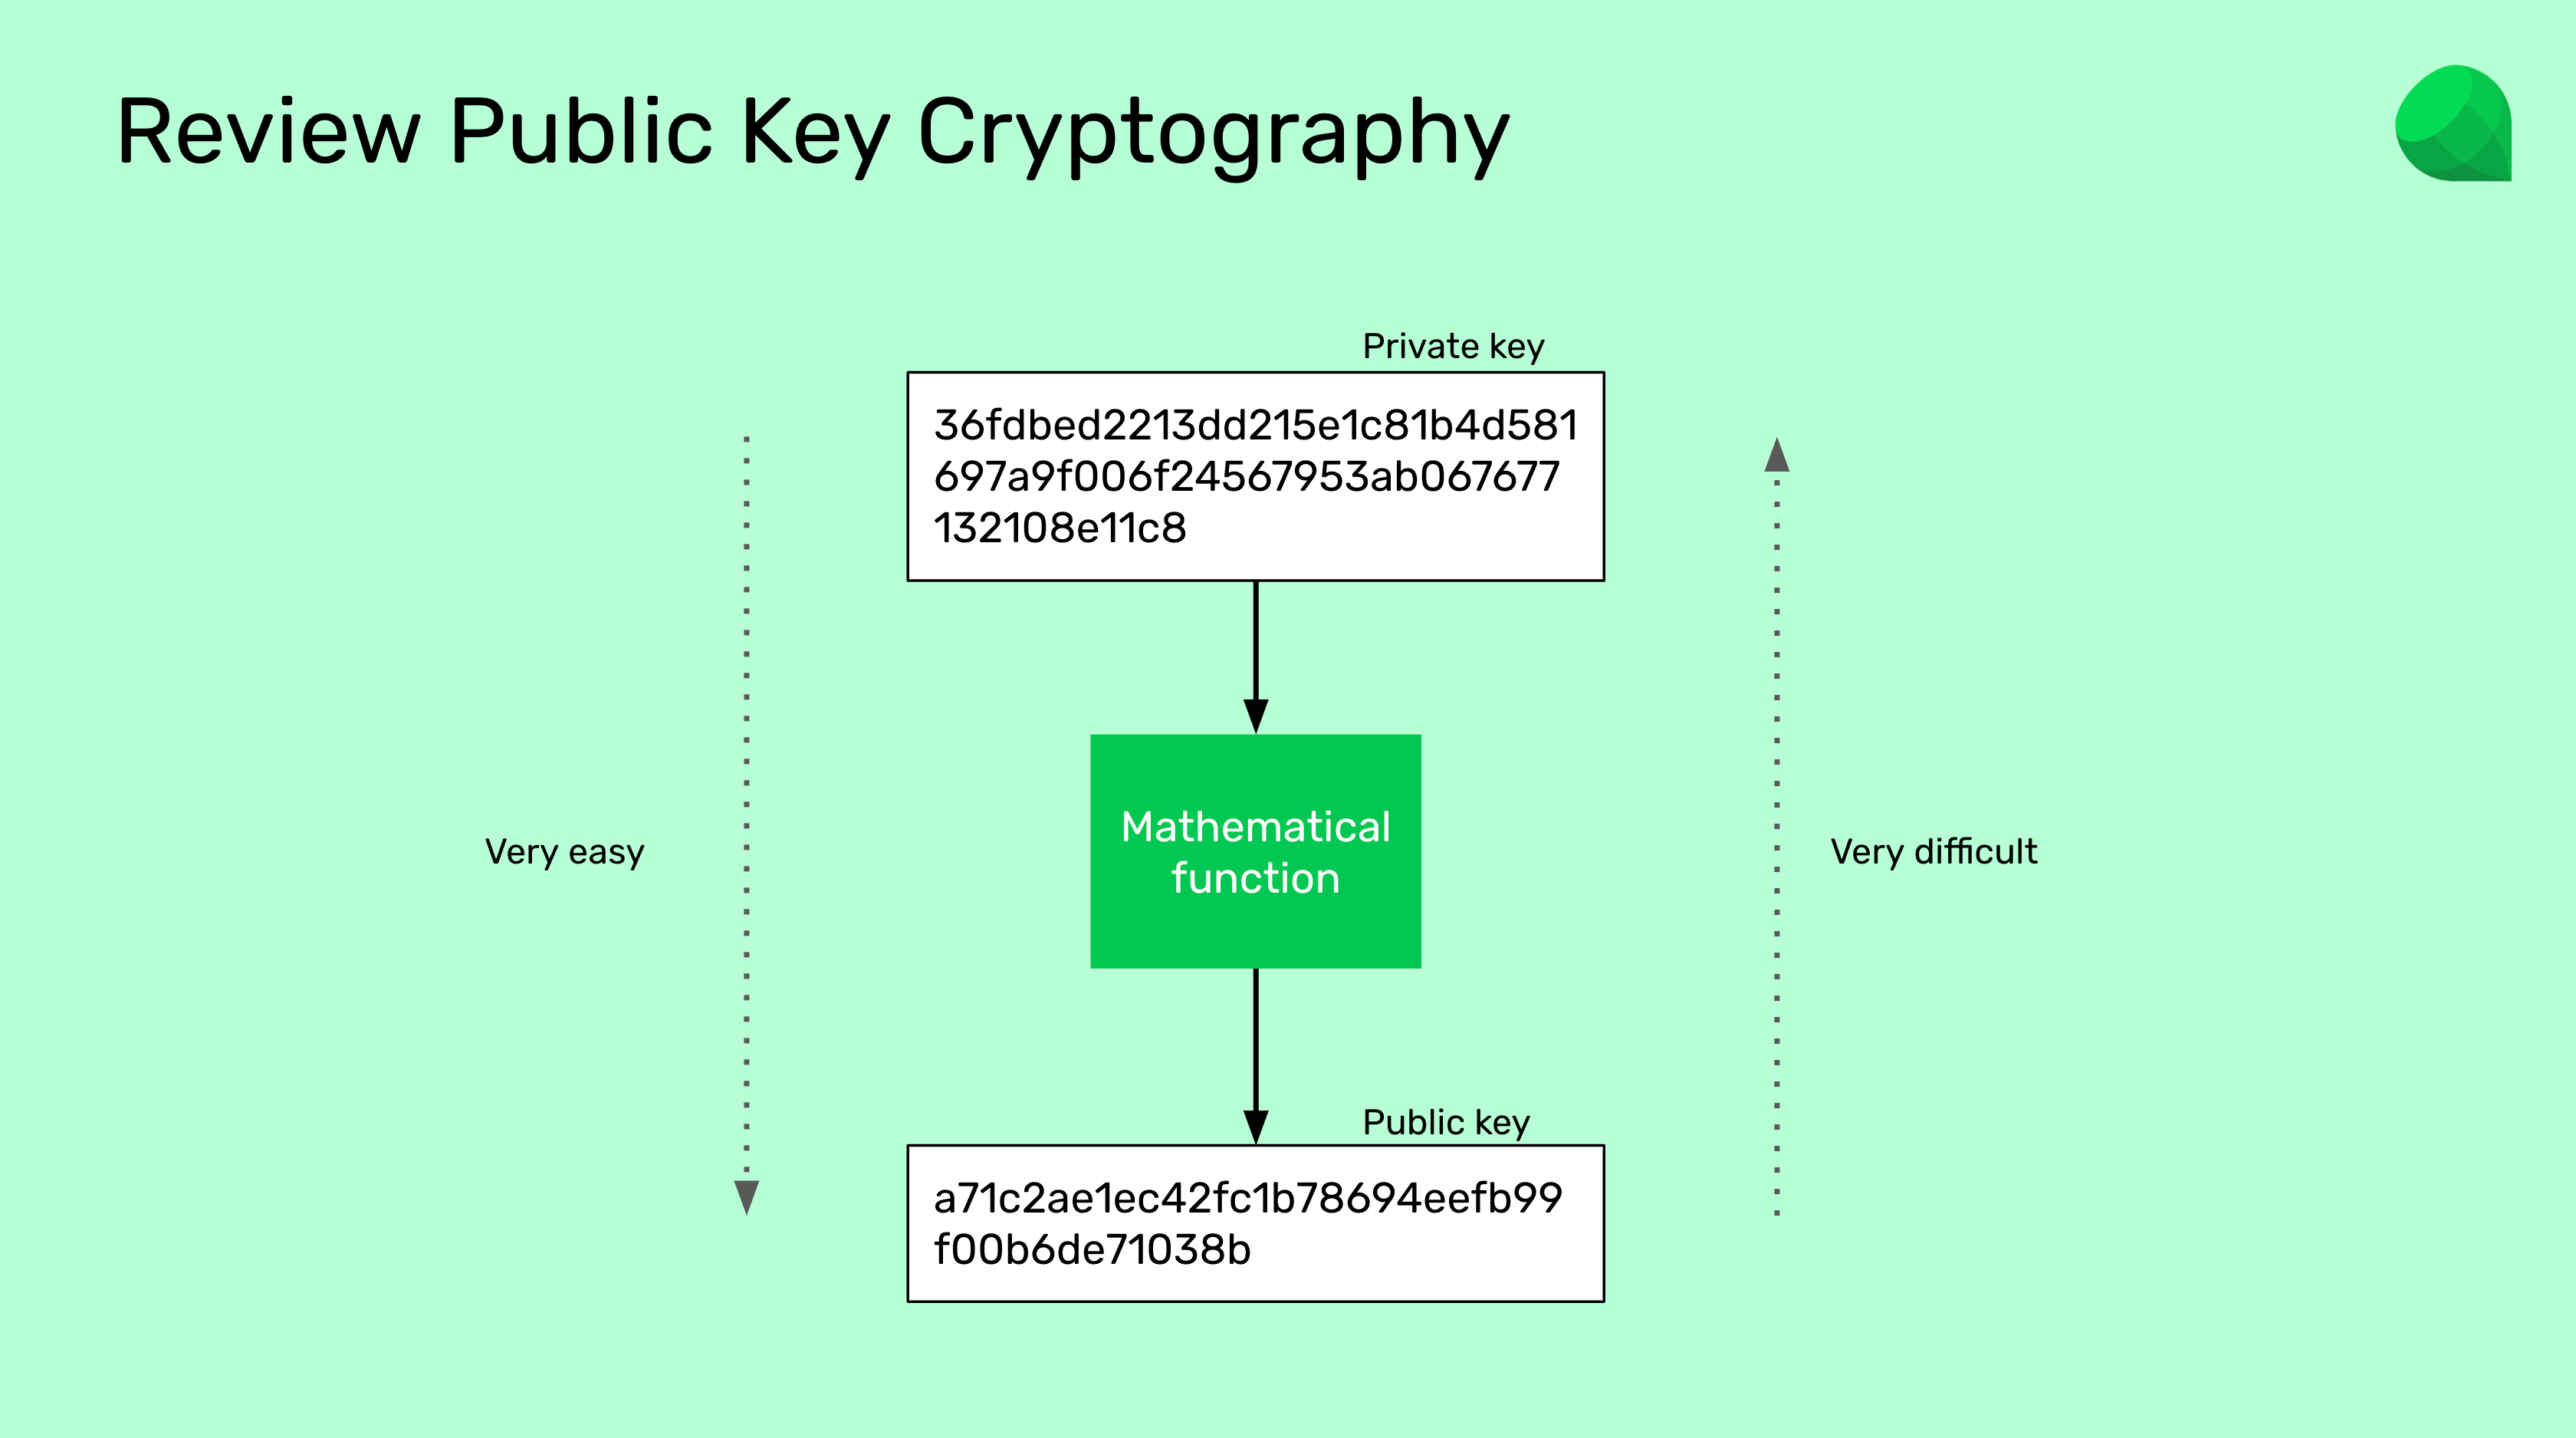 Review of Public Key Cryptography